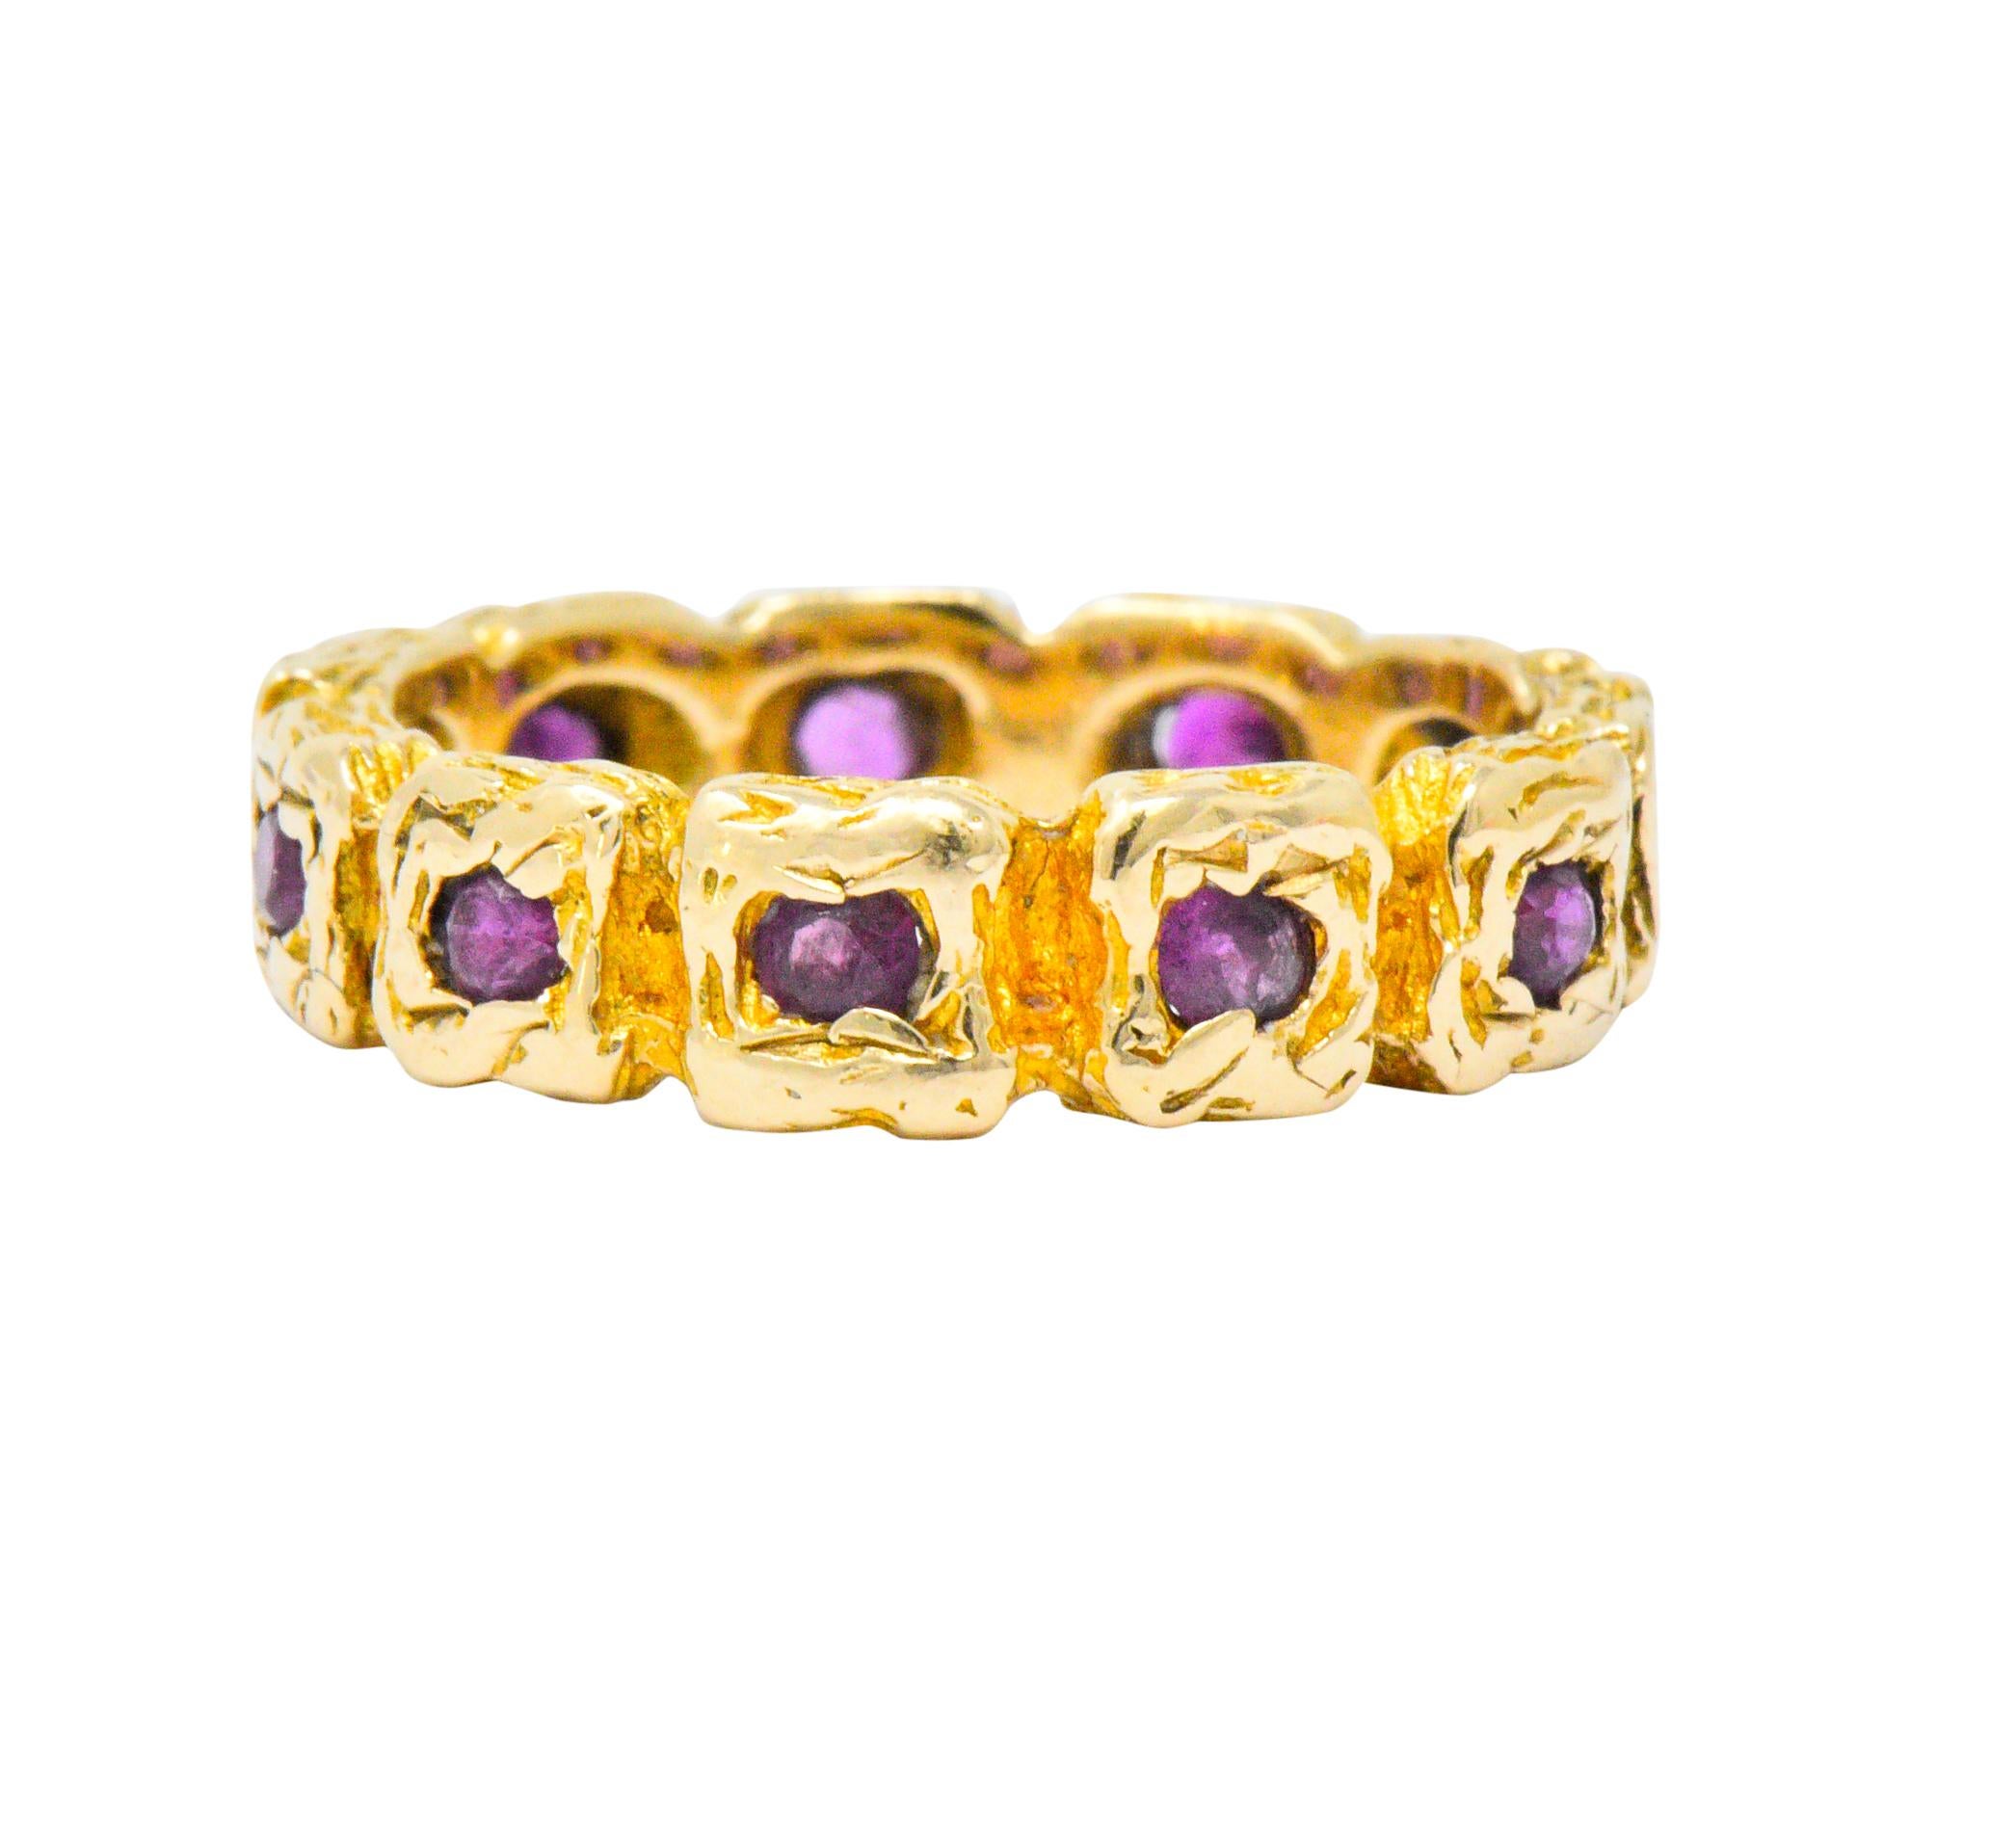 Eternity band ring designed as organically textured squares

Each set with a round cut ruby, weighing in total approximately 0.55 carat

Incredibly well-matched and purplish-red in color

Tested as 14 karat gold

Fully signed Tiffany & Co. 

Circa: